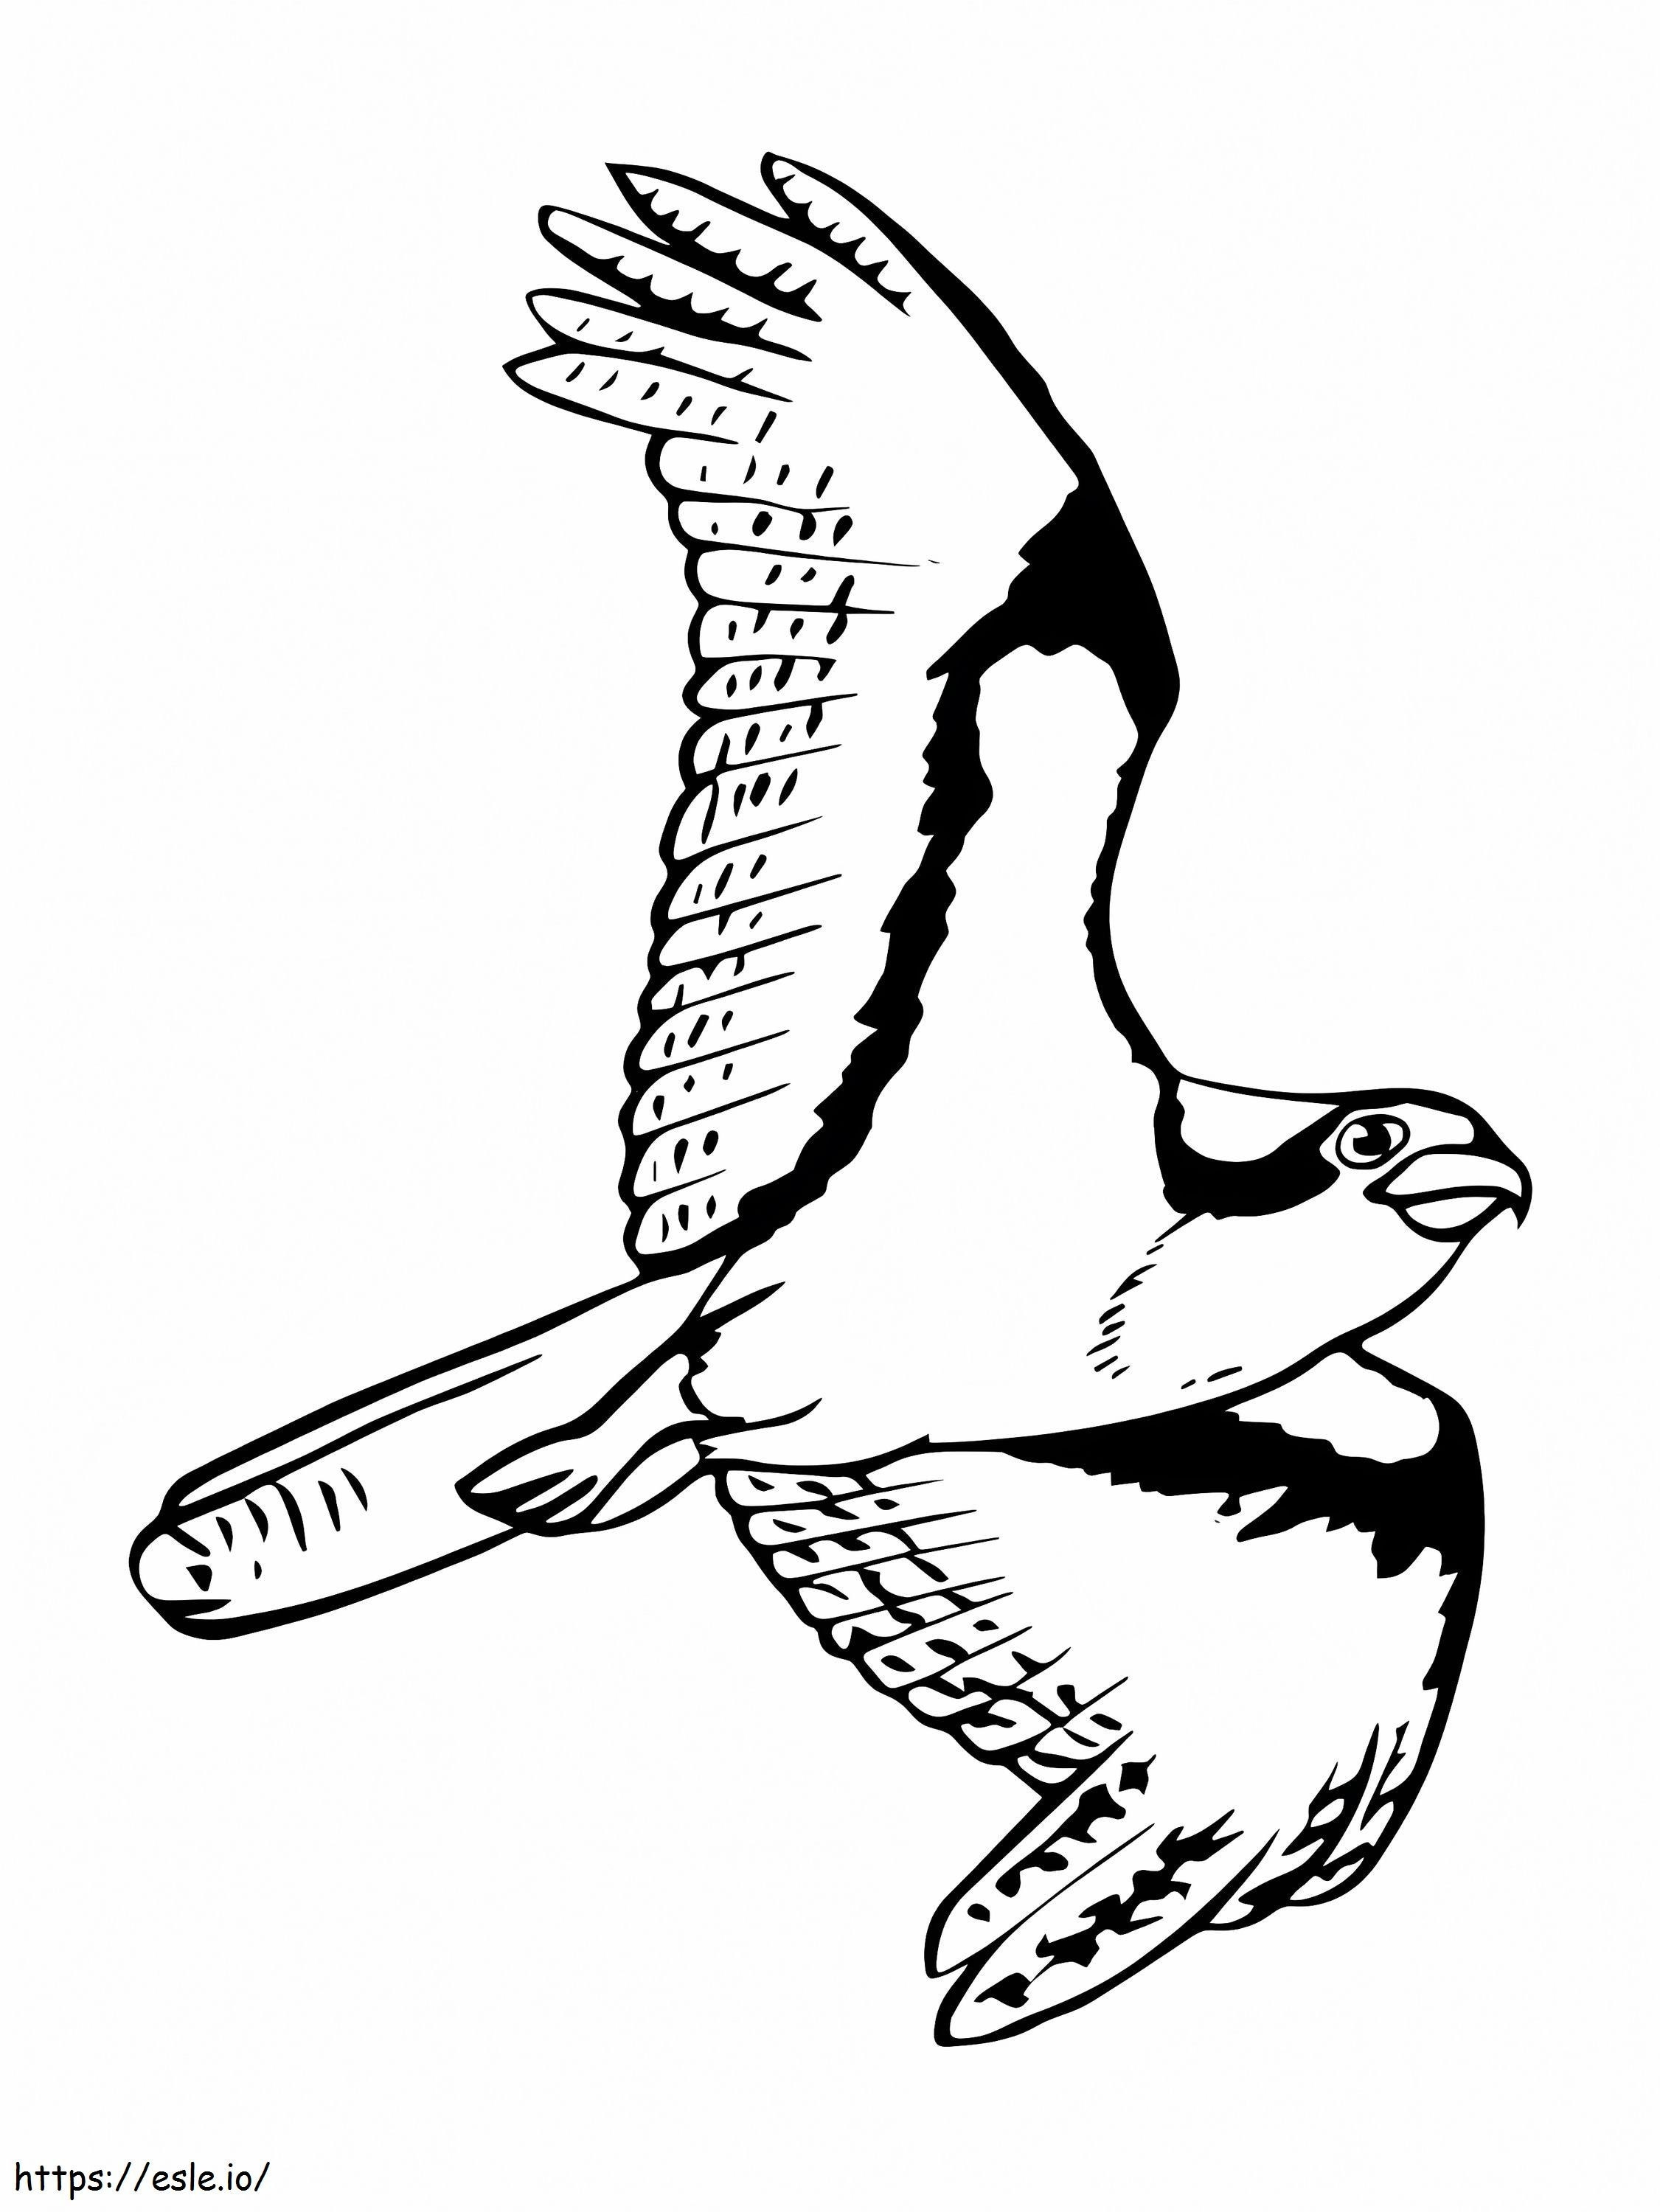 Soaring Osprey coloring page